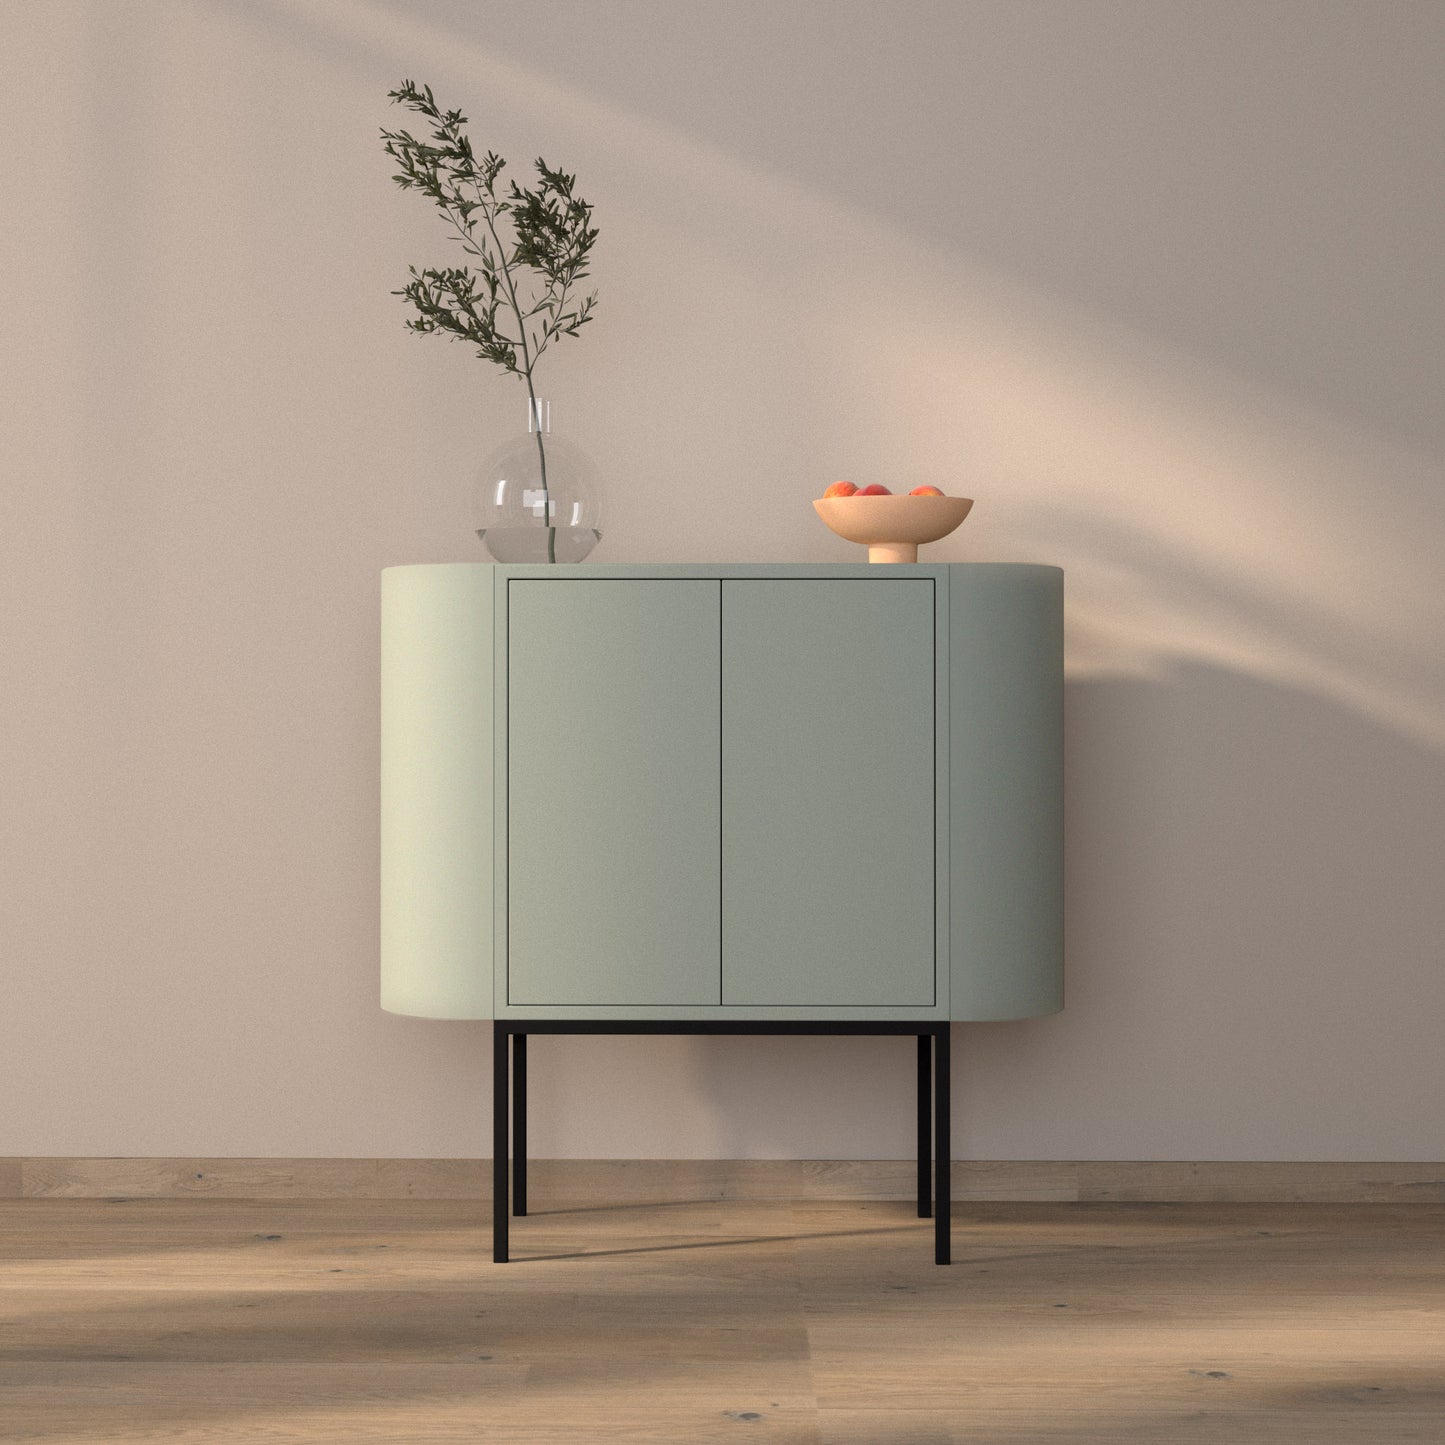 Siena 01 Sideboard in light matcha green color, powder-coated steel, elegant and modern piece of furniture for your living room